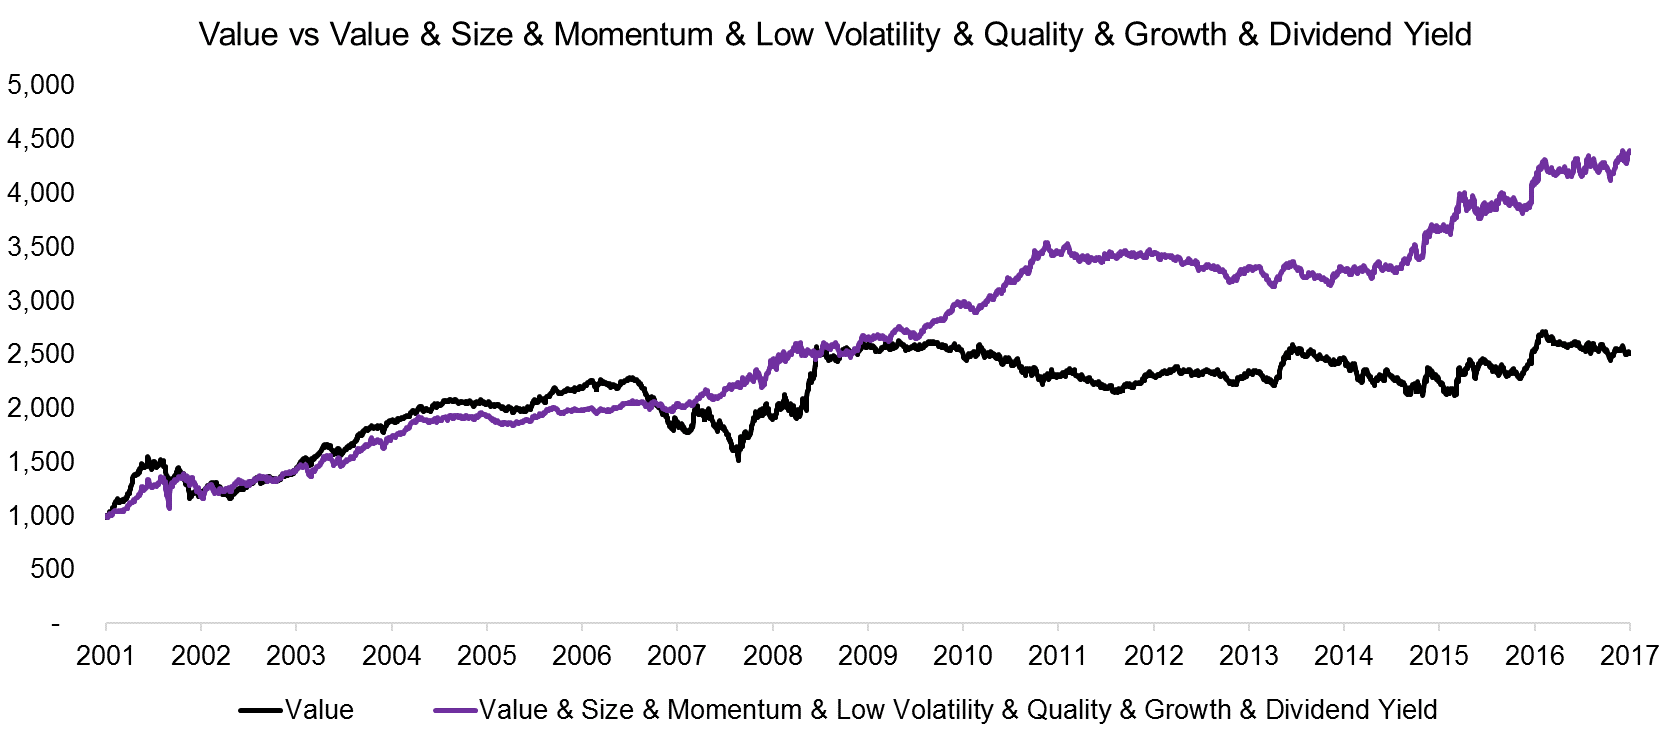 Value vs Value & Size & Momentum & Low Volatility & Quality & Growth & Dividend